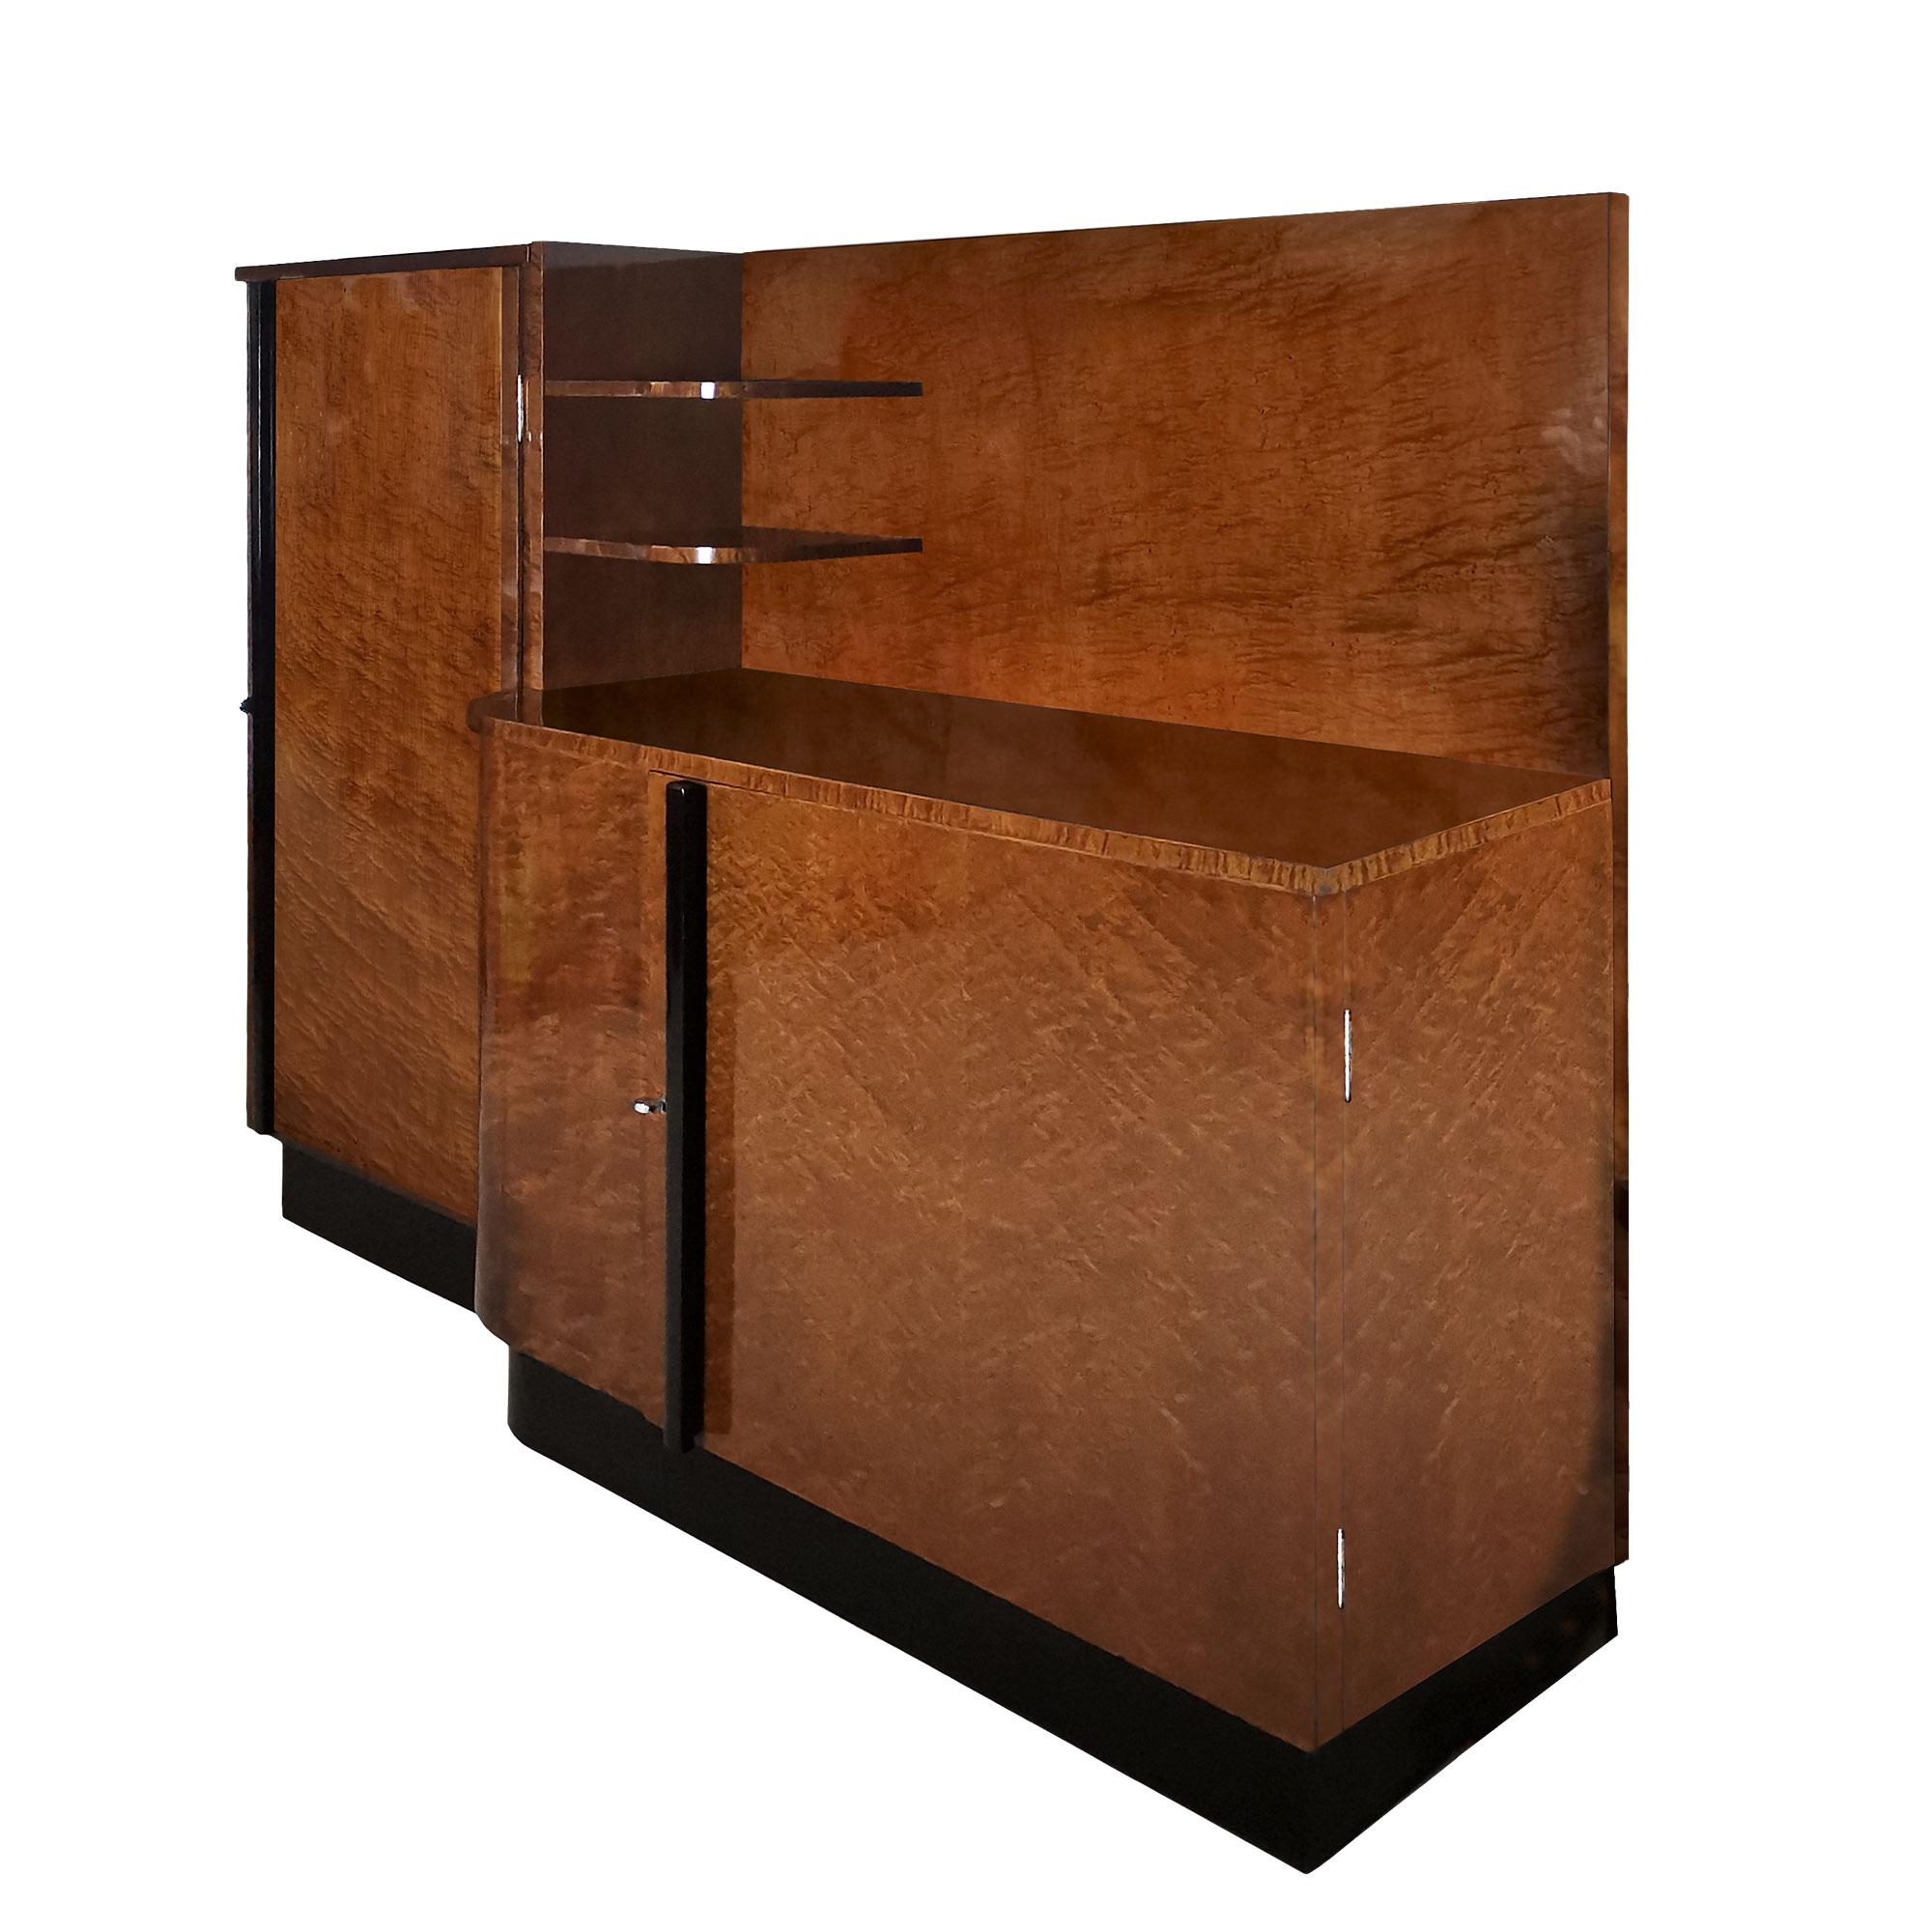 Large sideboard cabinet in speckled mahogany veneered wood on a black lacquered base, black lacquered solid wood handles, cherry wood interior, brass and nickel-plated brass hardware. French polish.

Second matching sideboard available.

Italy